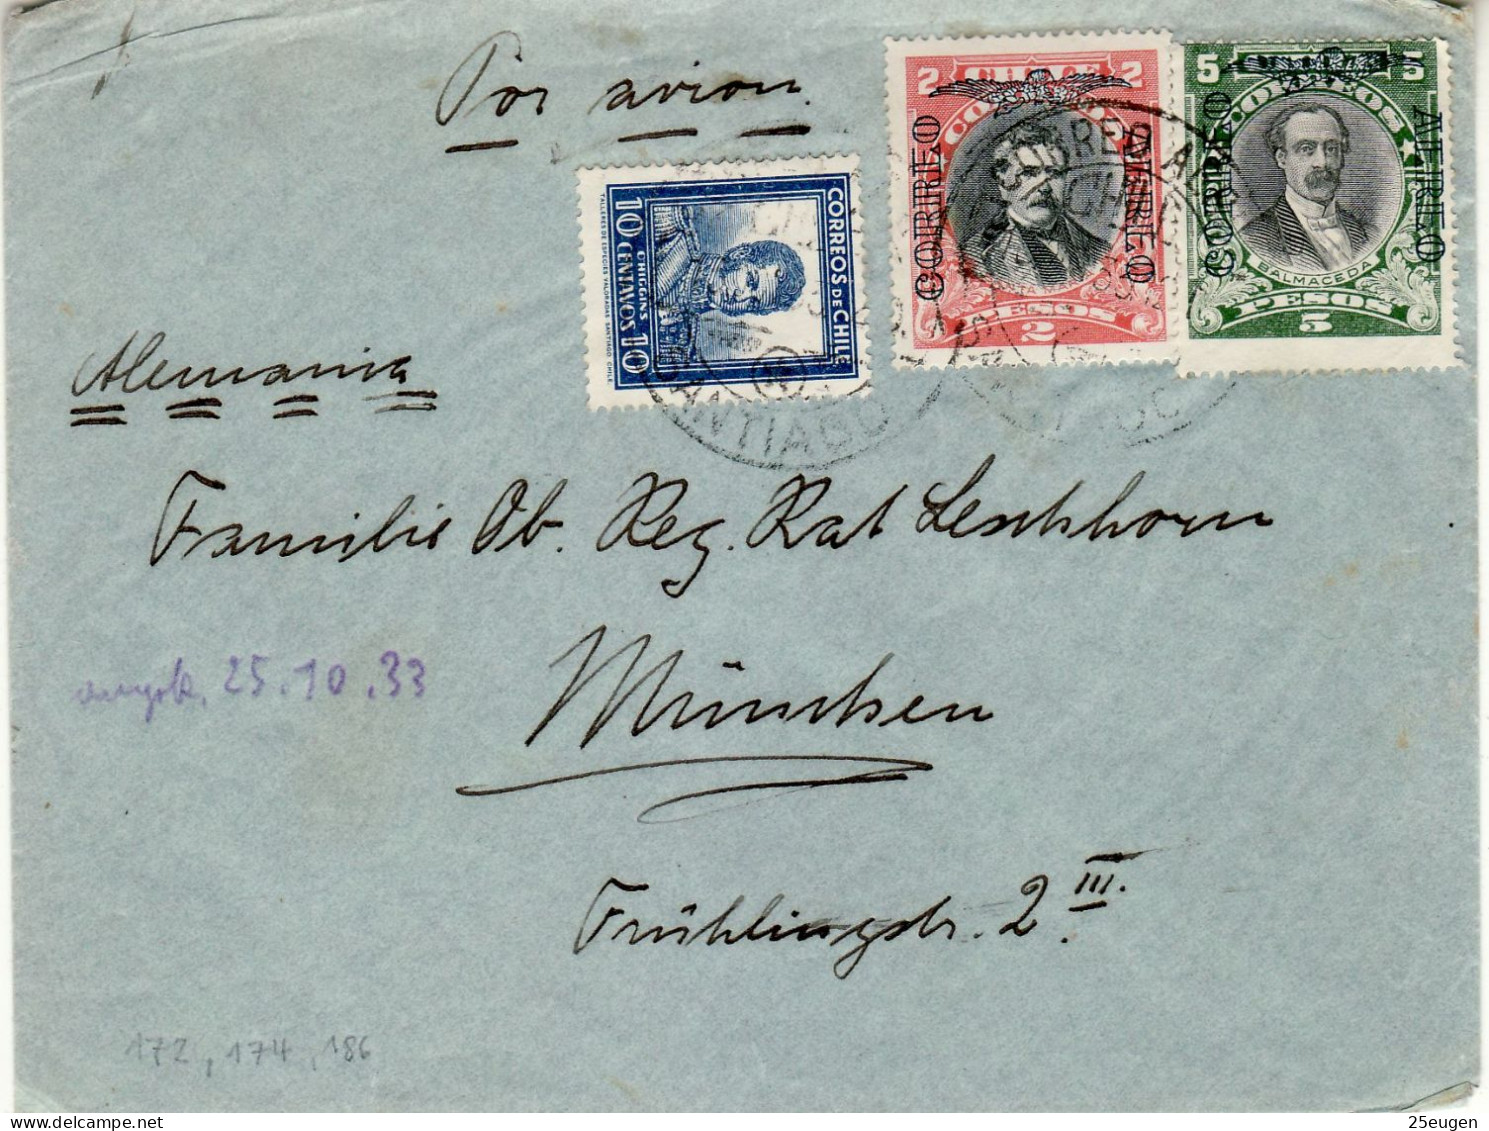 CHILE 1933 AIRMAIL LETTER SENT FROM SANTIAGO TO MUENCHEN - Cile